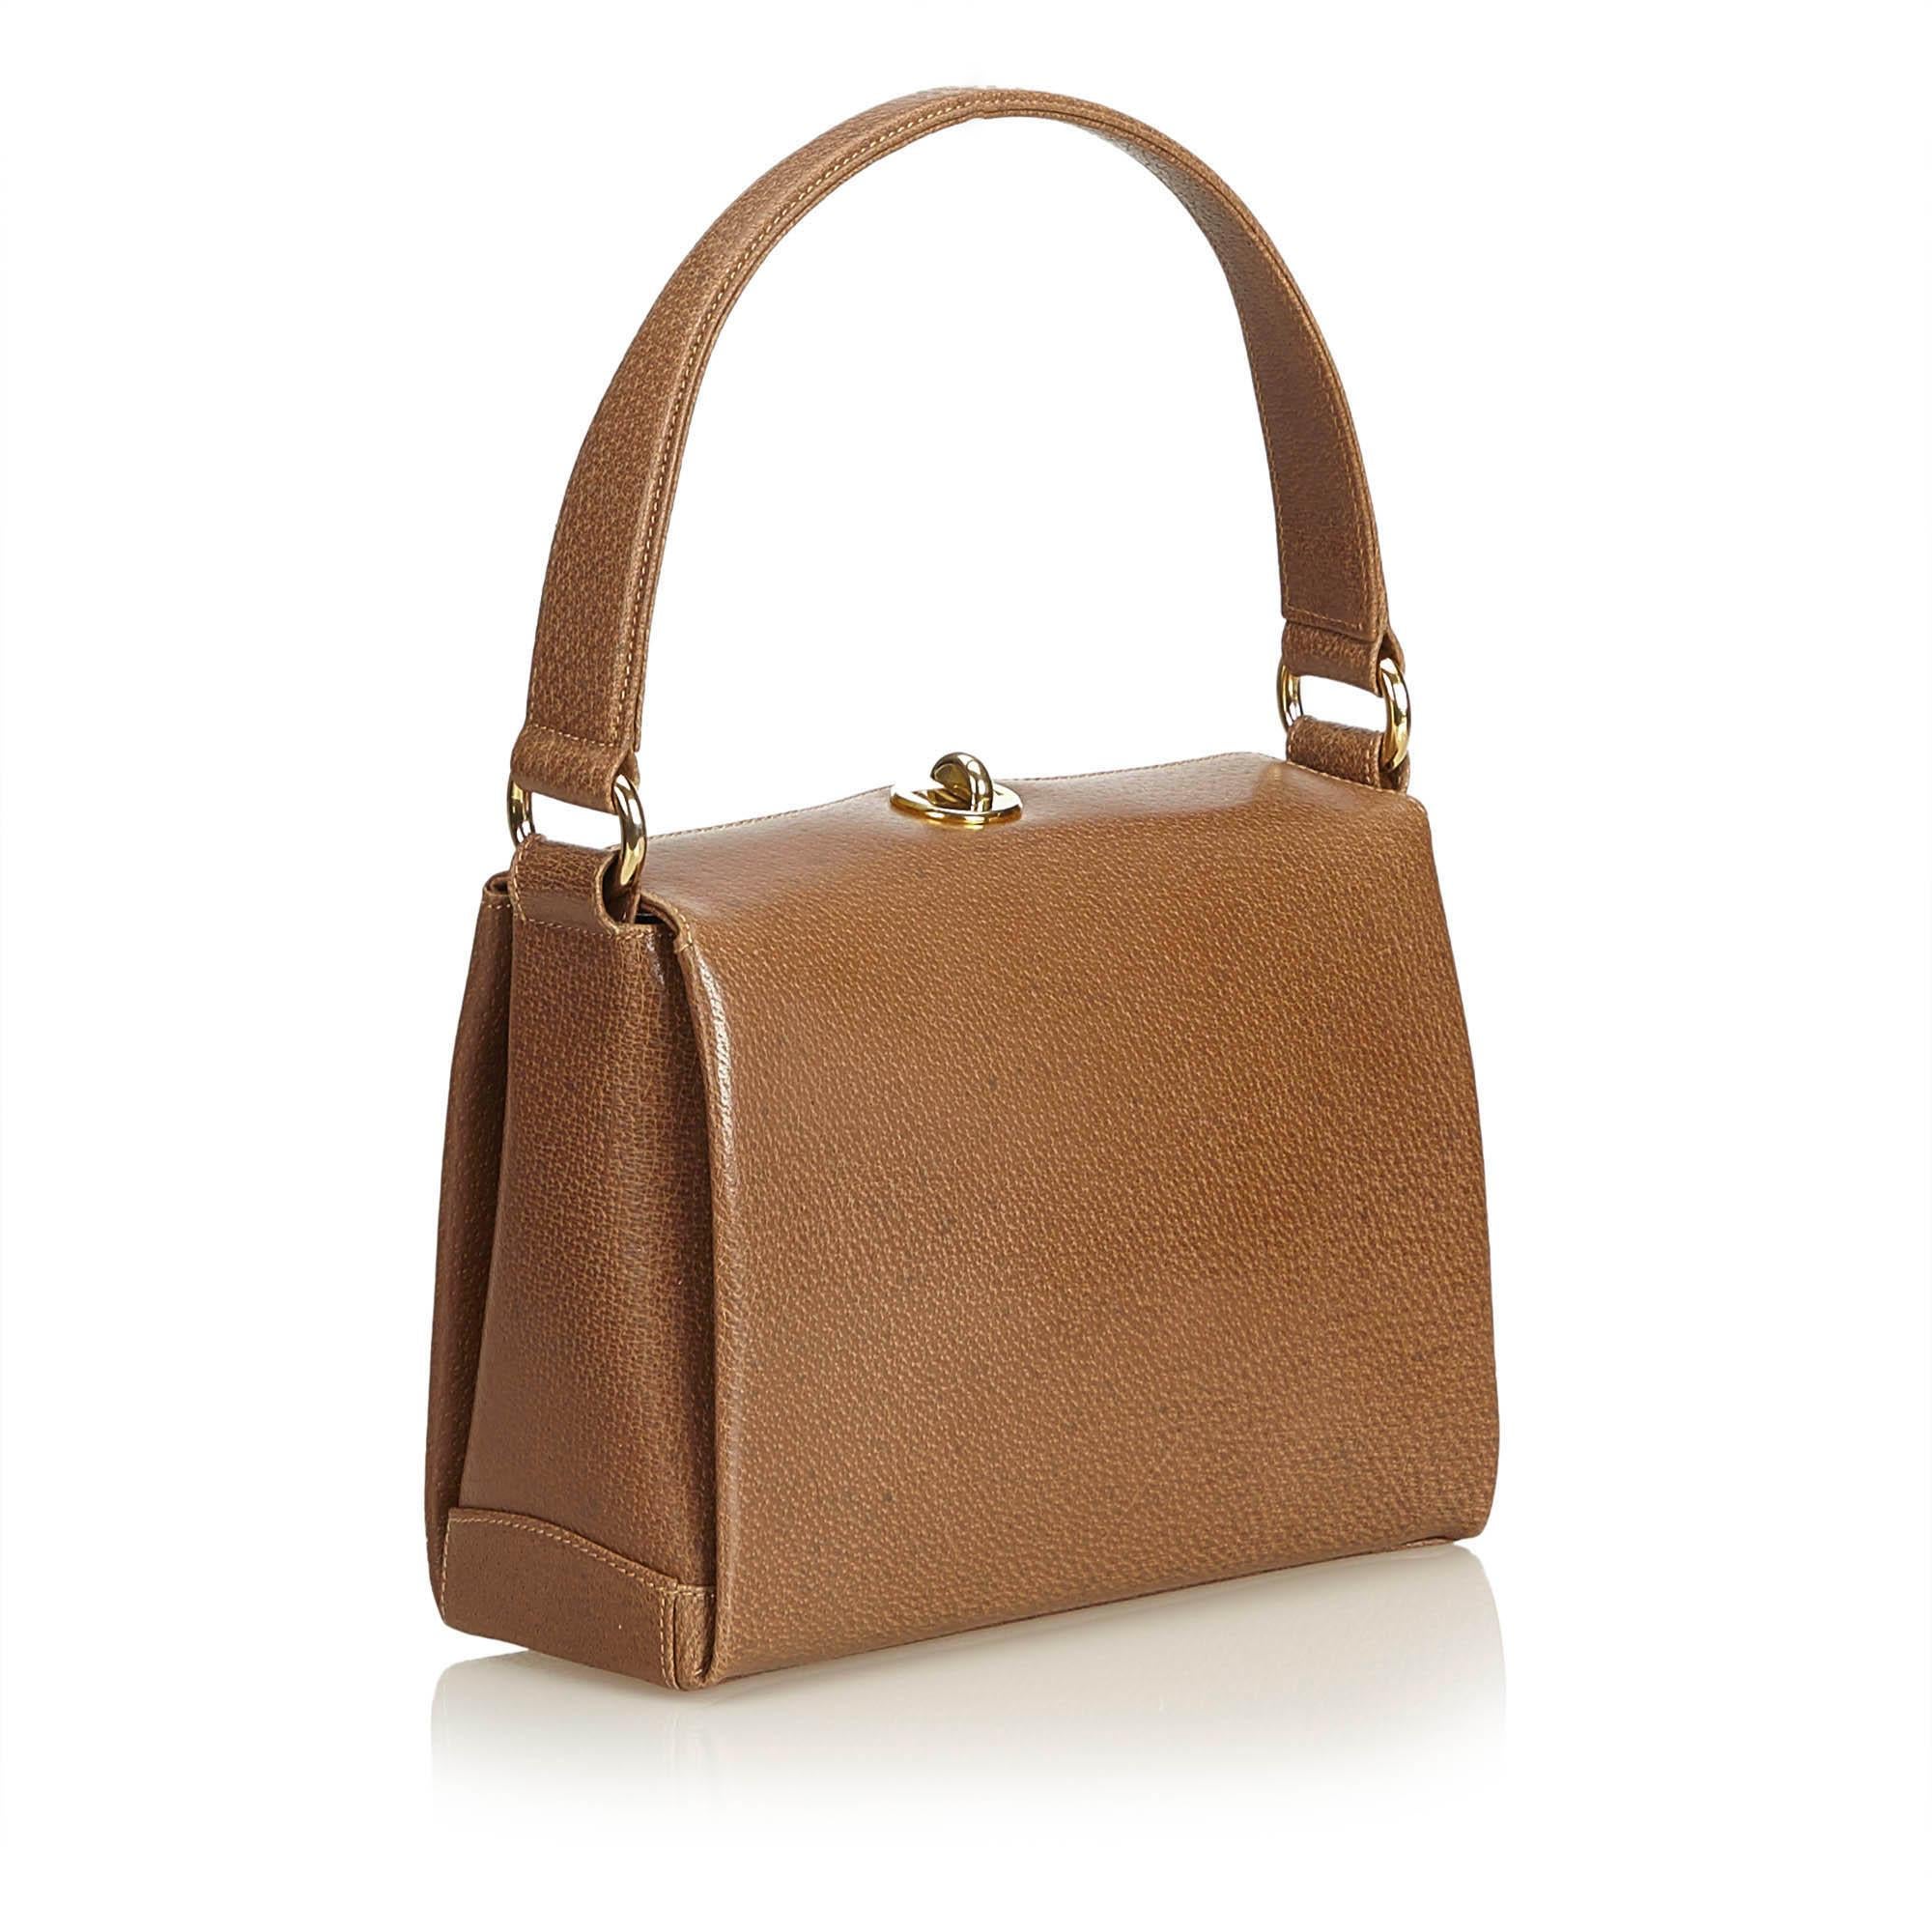 This handbag features a leather body, flat top handle, top flap with twist-lock closure, and interior zip and open pockets.

It carries a AB condition rating.

Dimensions: 
Length 16.00 cm
Width 21.00 cm
Depth 6.50 cm
Hand Drop 14.00 cm

Inclusions: